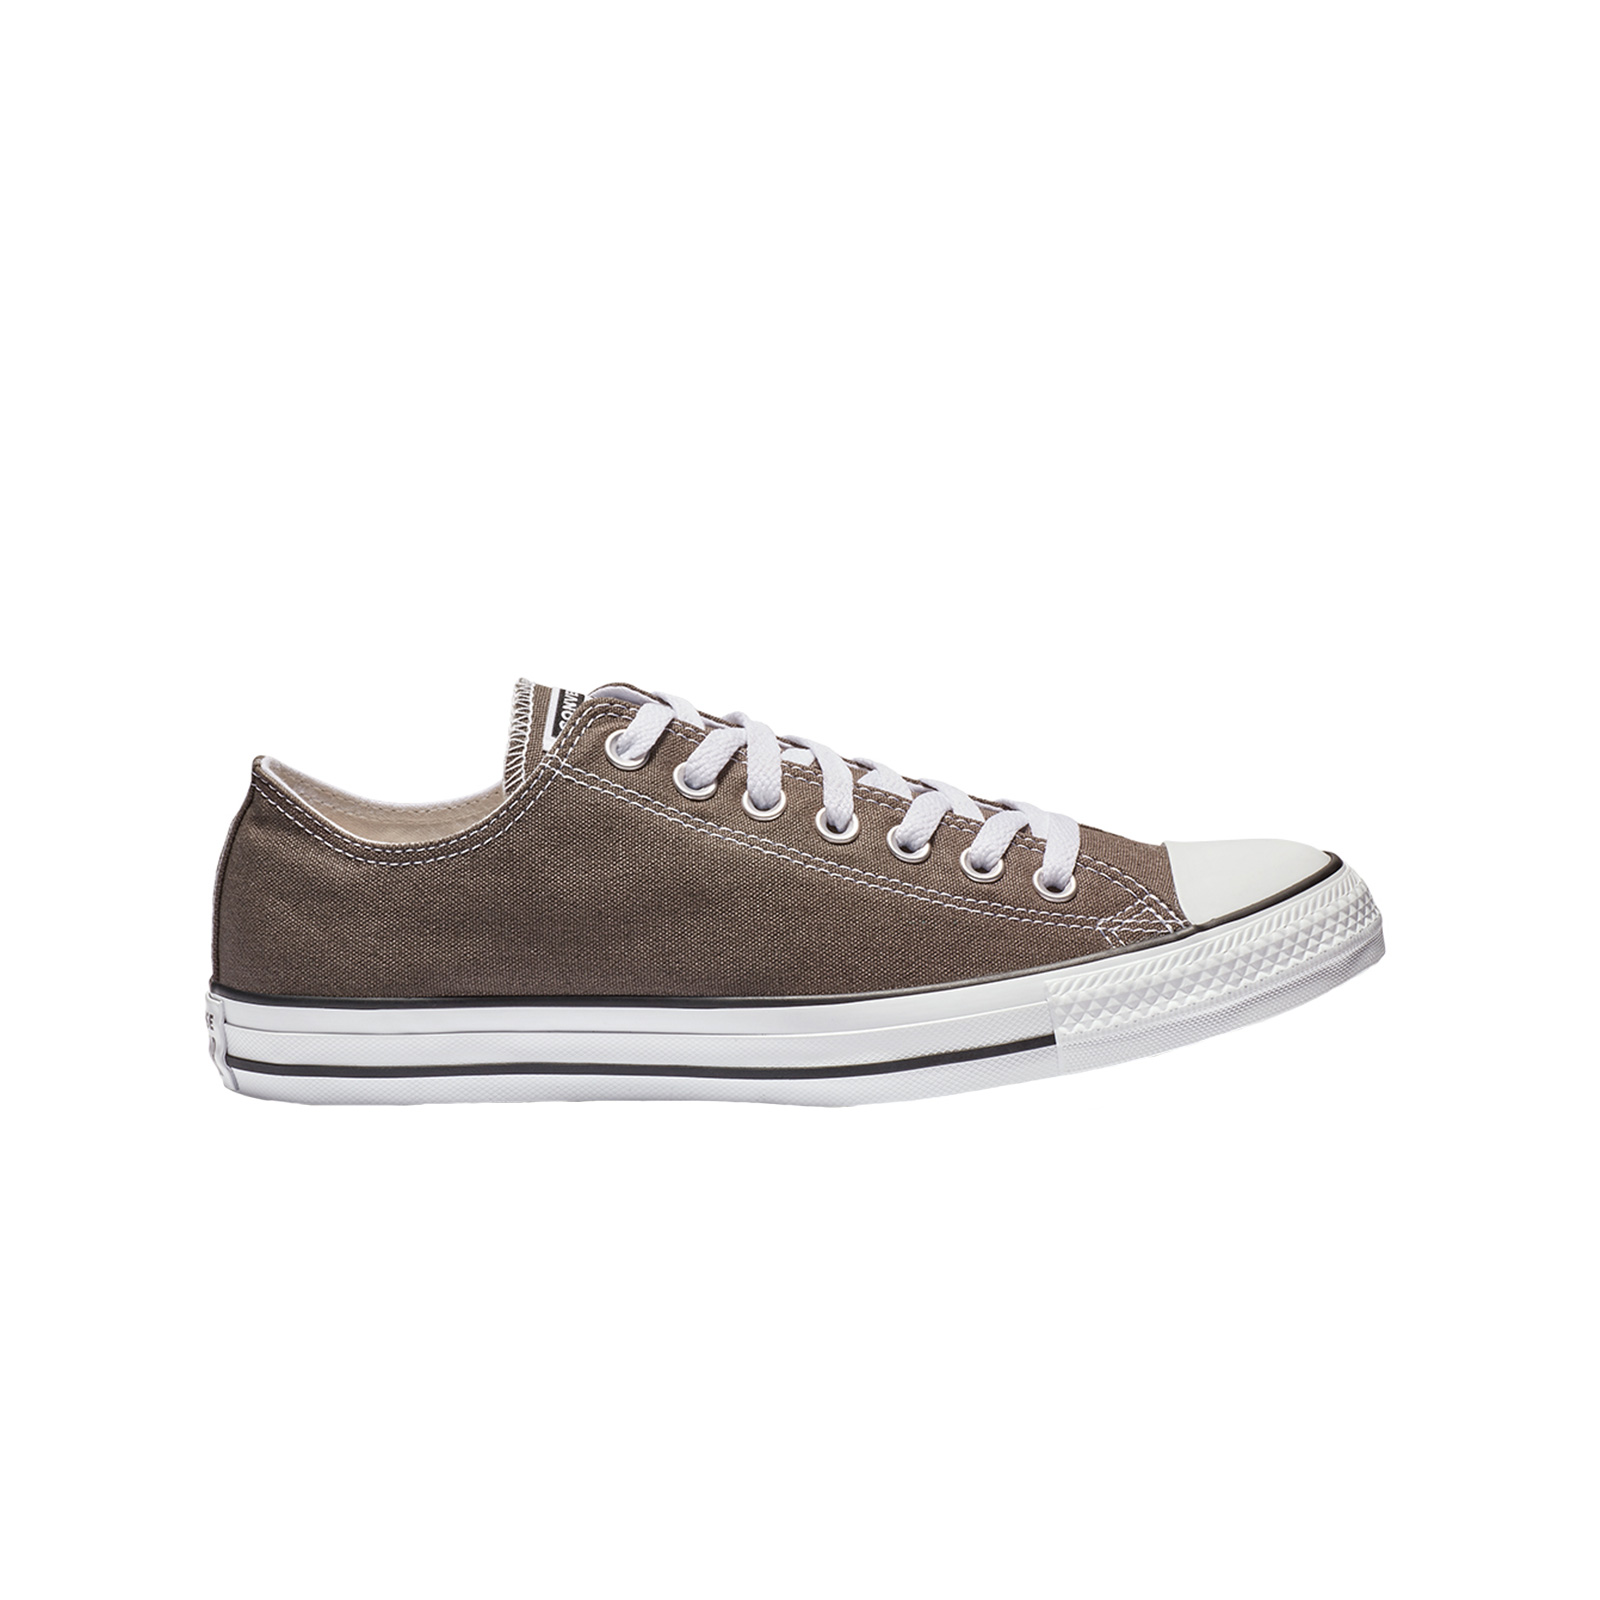 Converse - CHUCK TAYLOR ALL STAR - 010-CHARCOAL Ανδρικά > Παπούτσια > Sneaker > Παπούτσι Low Cut